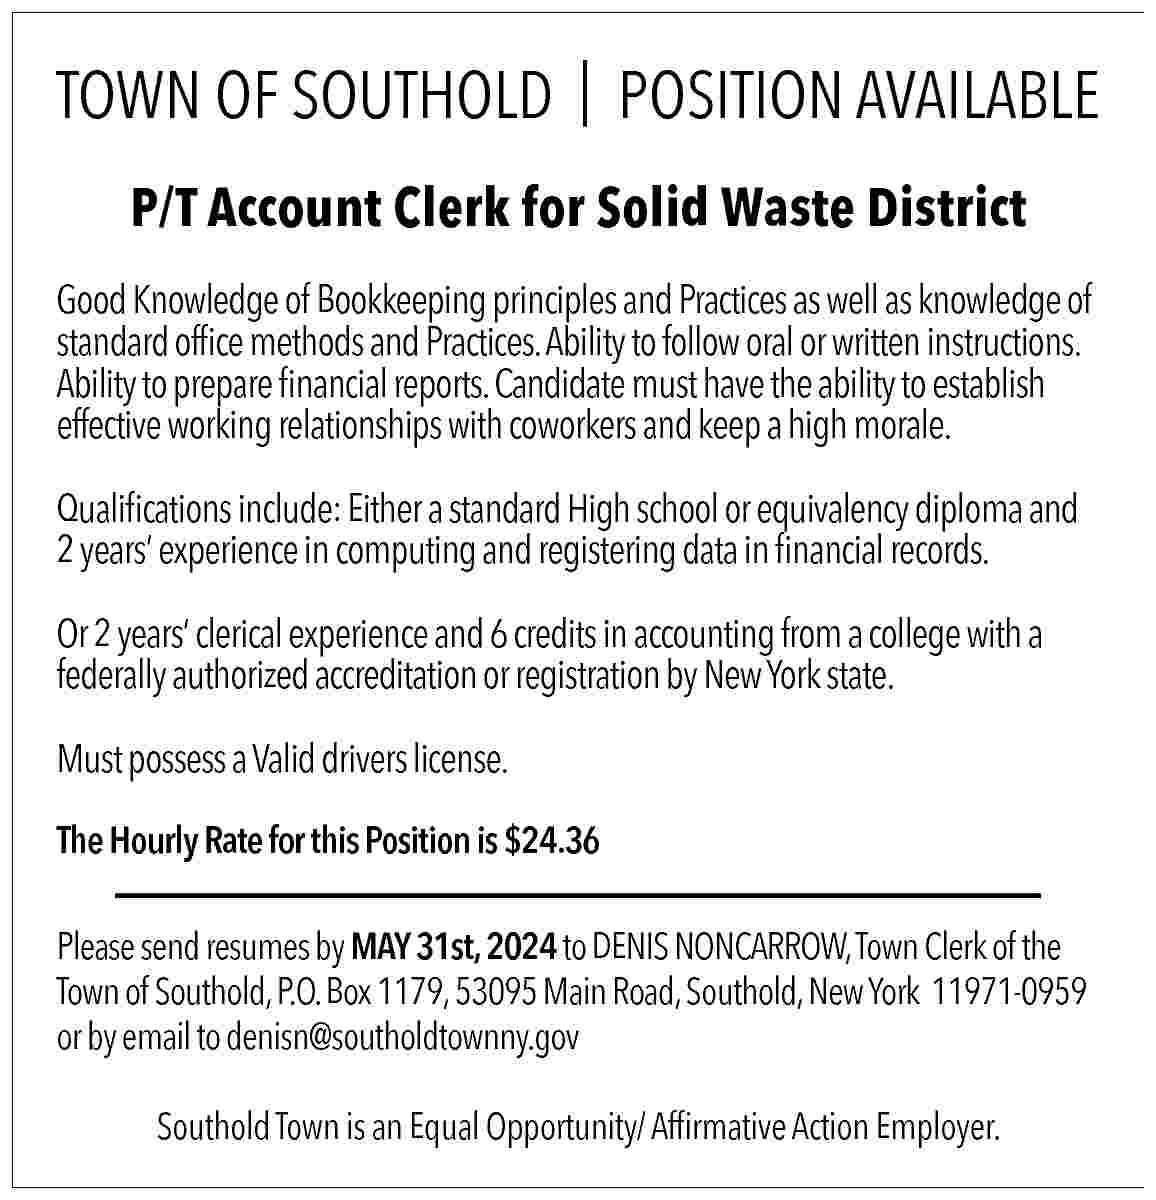 TOWN OF SOUTHOLD | POSITION  TOWN OF SOUTHOLD | POSITION AVAILABLE  P/T Account Clerk for Solid Waste District  Good Knowledge of Bookkeeping principles and Practices as well as knowledge of  standard office methods and Practices. Ability to follow oral or written instructions.  Ability to prepare financial reports. Candidate must have the ability to establish  effective working relationships with coworkers and keep a high morale.  Qualifications include: Either a standard High school or equivalency diploma and  2 years    experience in computing and registering data in financial records.  Or 2 years    clerical experience and 6 credits in accounting from a college with a  federally authorized accreditation or registration by New York state.  Must possess a Valid drivers license.  The Hourly Rate for this Position is $24.36  Please send resumes by MAY 31st, 2024 to DENIS NONCARROW, Town Clerk of the  Town of Southold, P.O. Box 1179, 53095 Main Road, Southold, New York 11971-0959  or by email to denisn@southoldtownny.gov  Southold Town is an Equal Opportunity/ Affirmative Action Employer.     